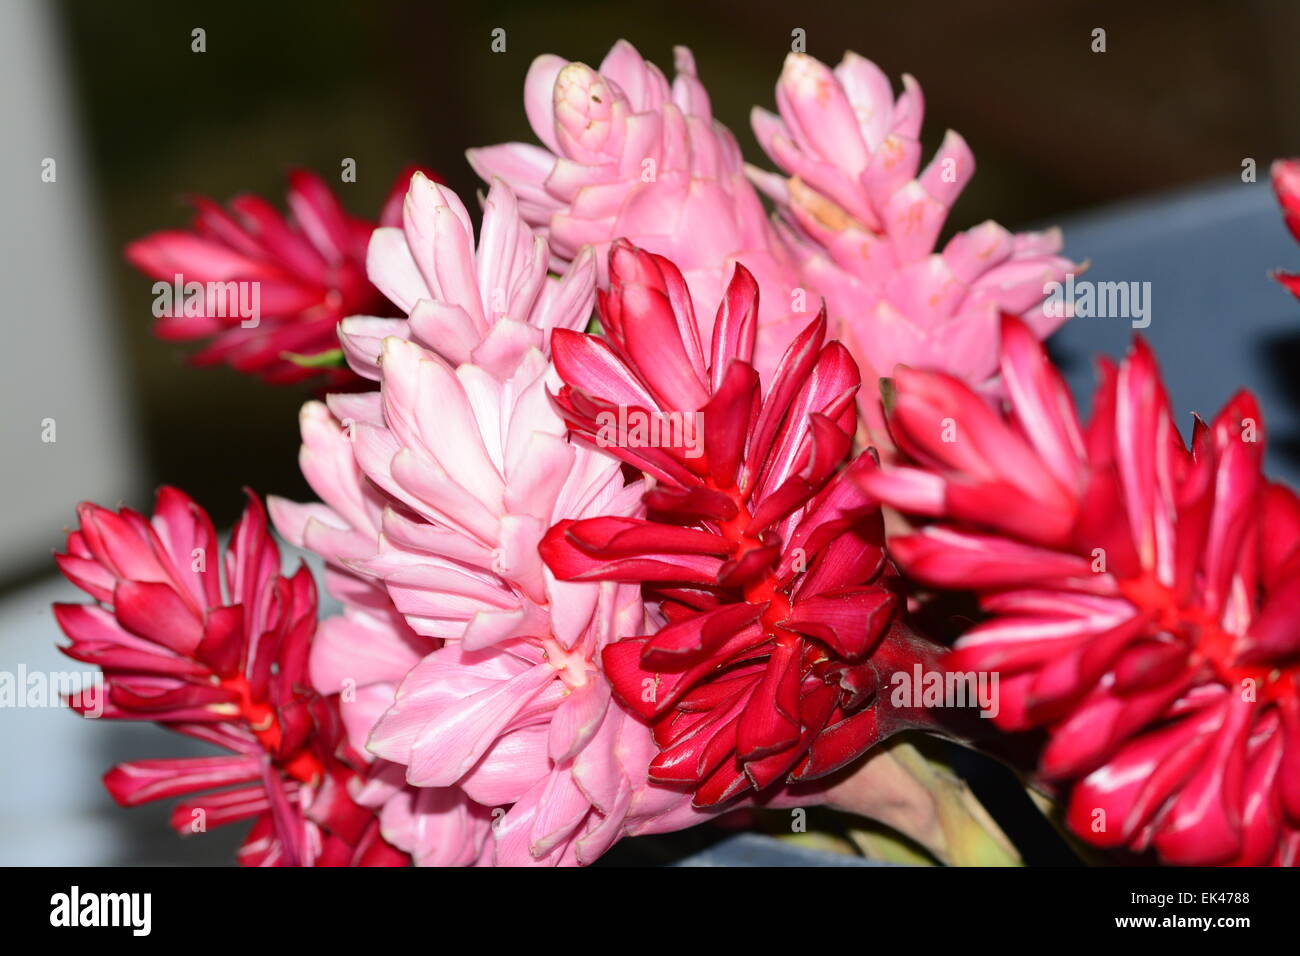 Red and pink ginger flowers Stock Photo